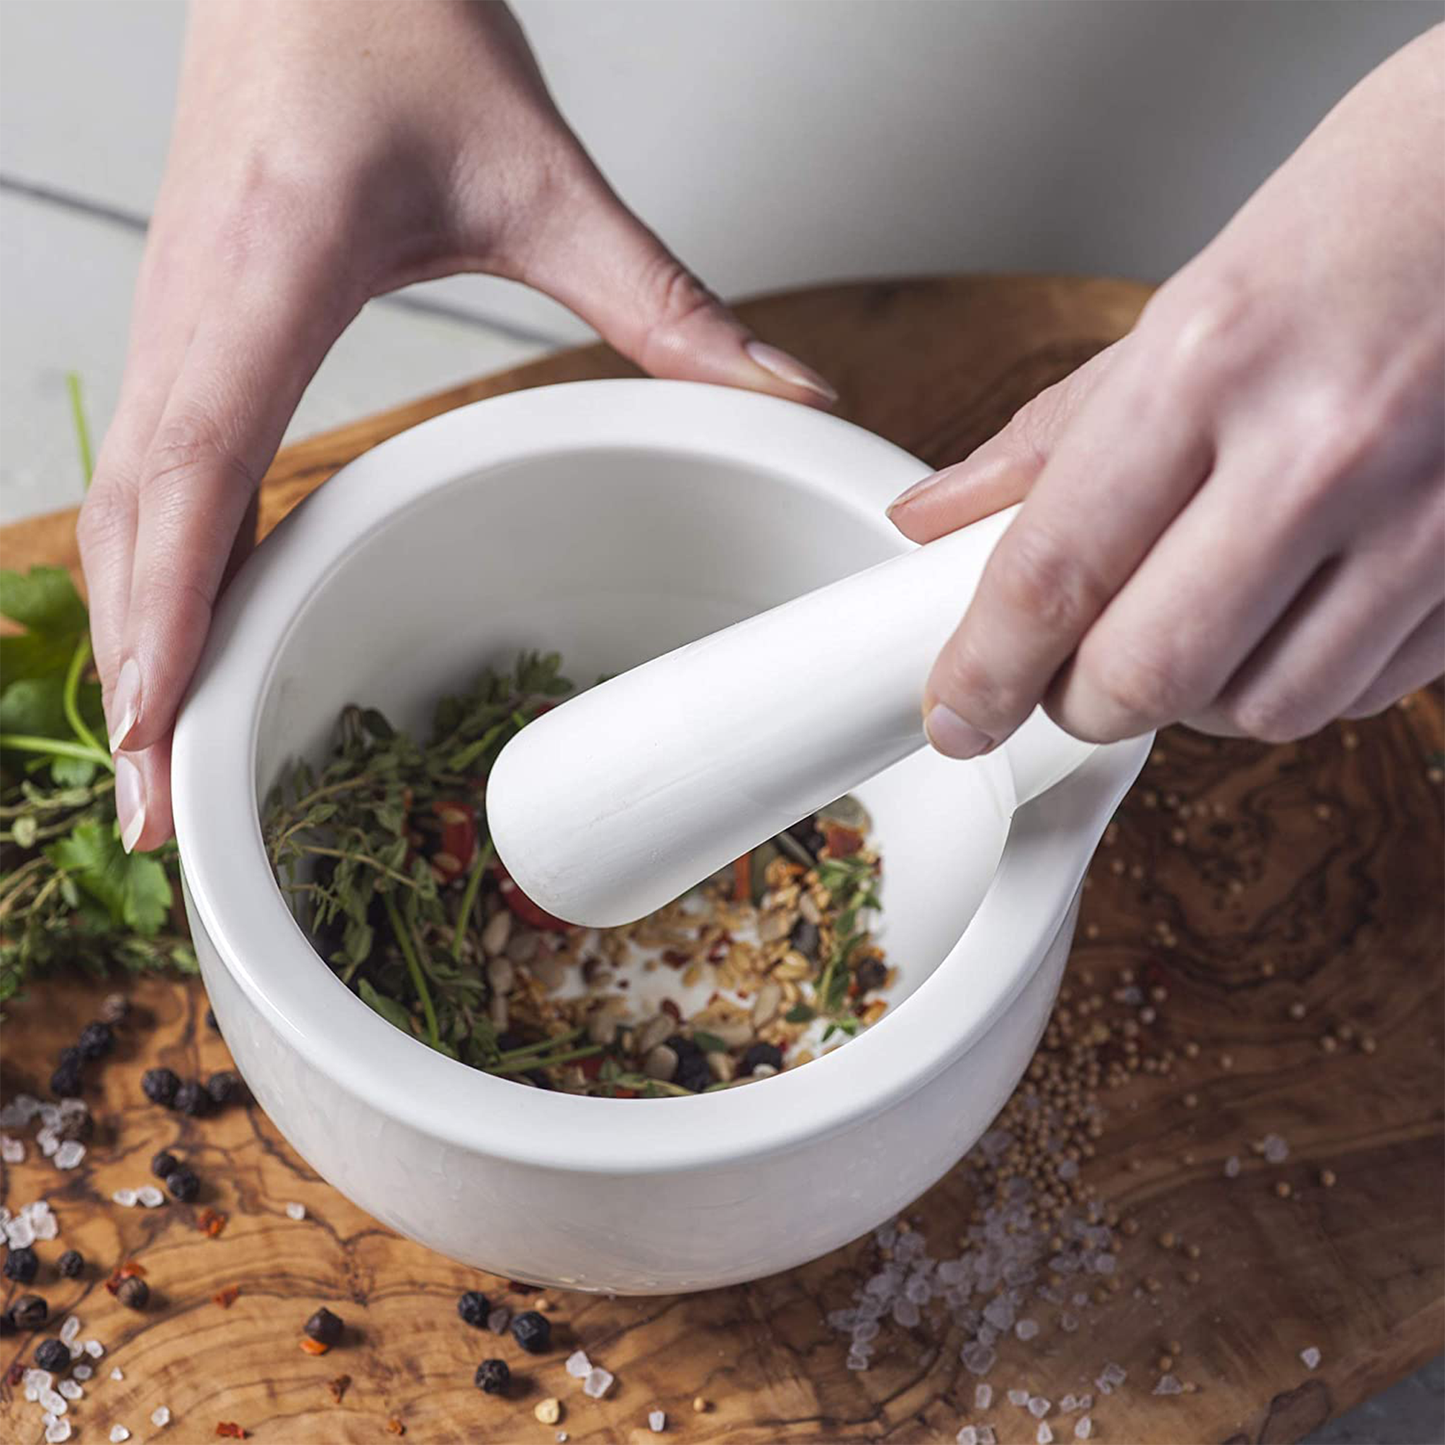 the and pestle being used to mash herbs and seeds